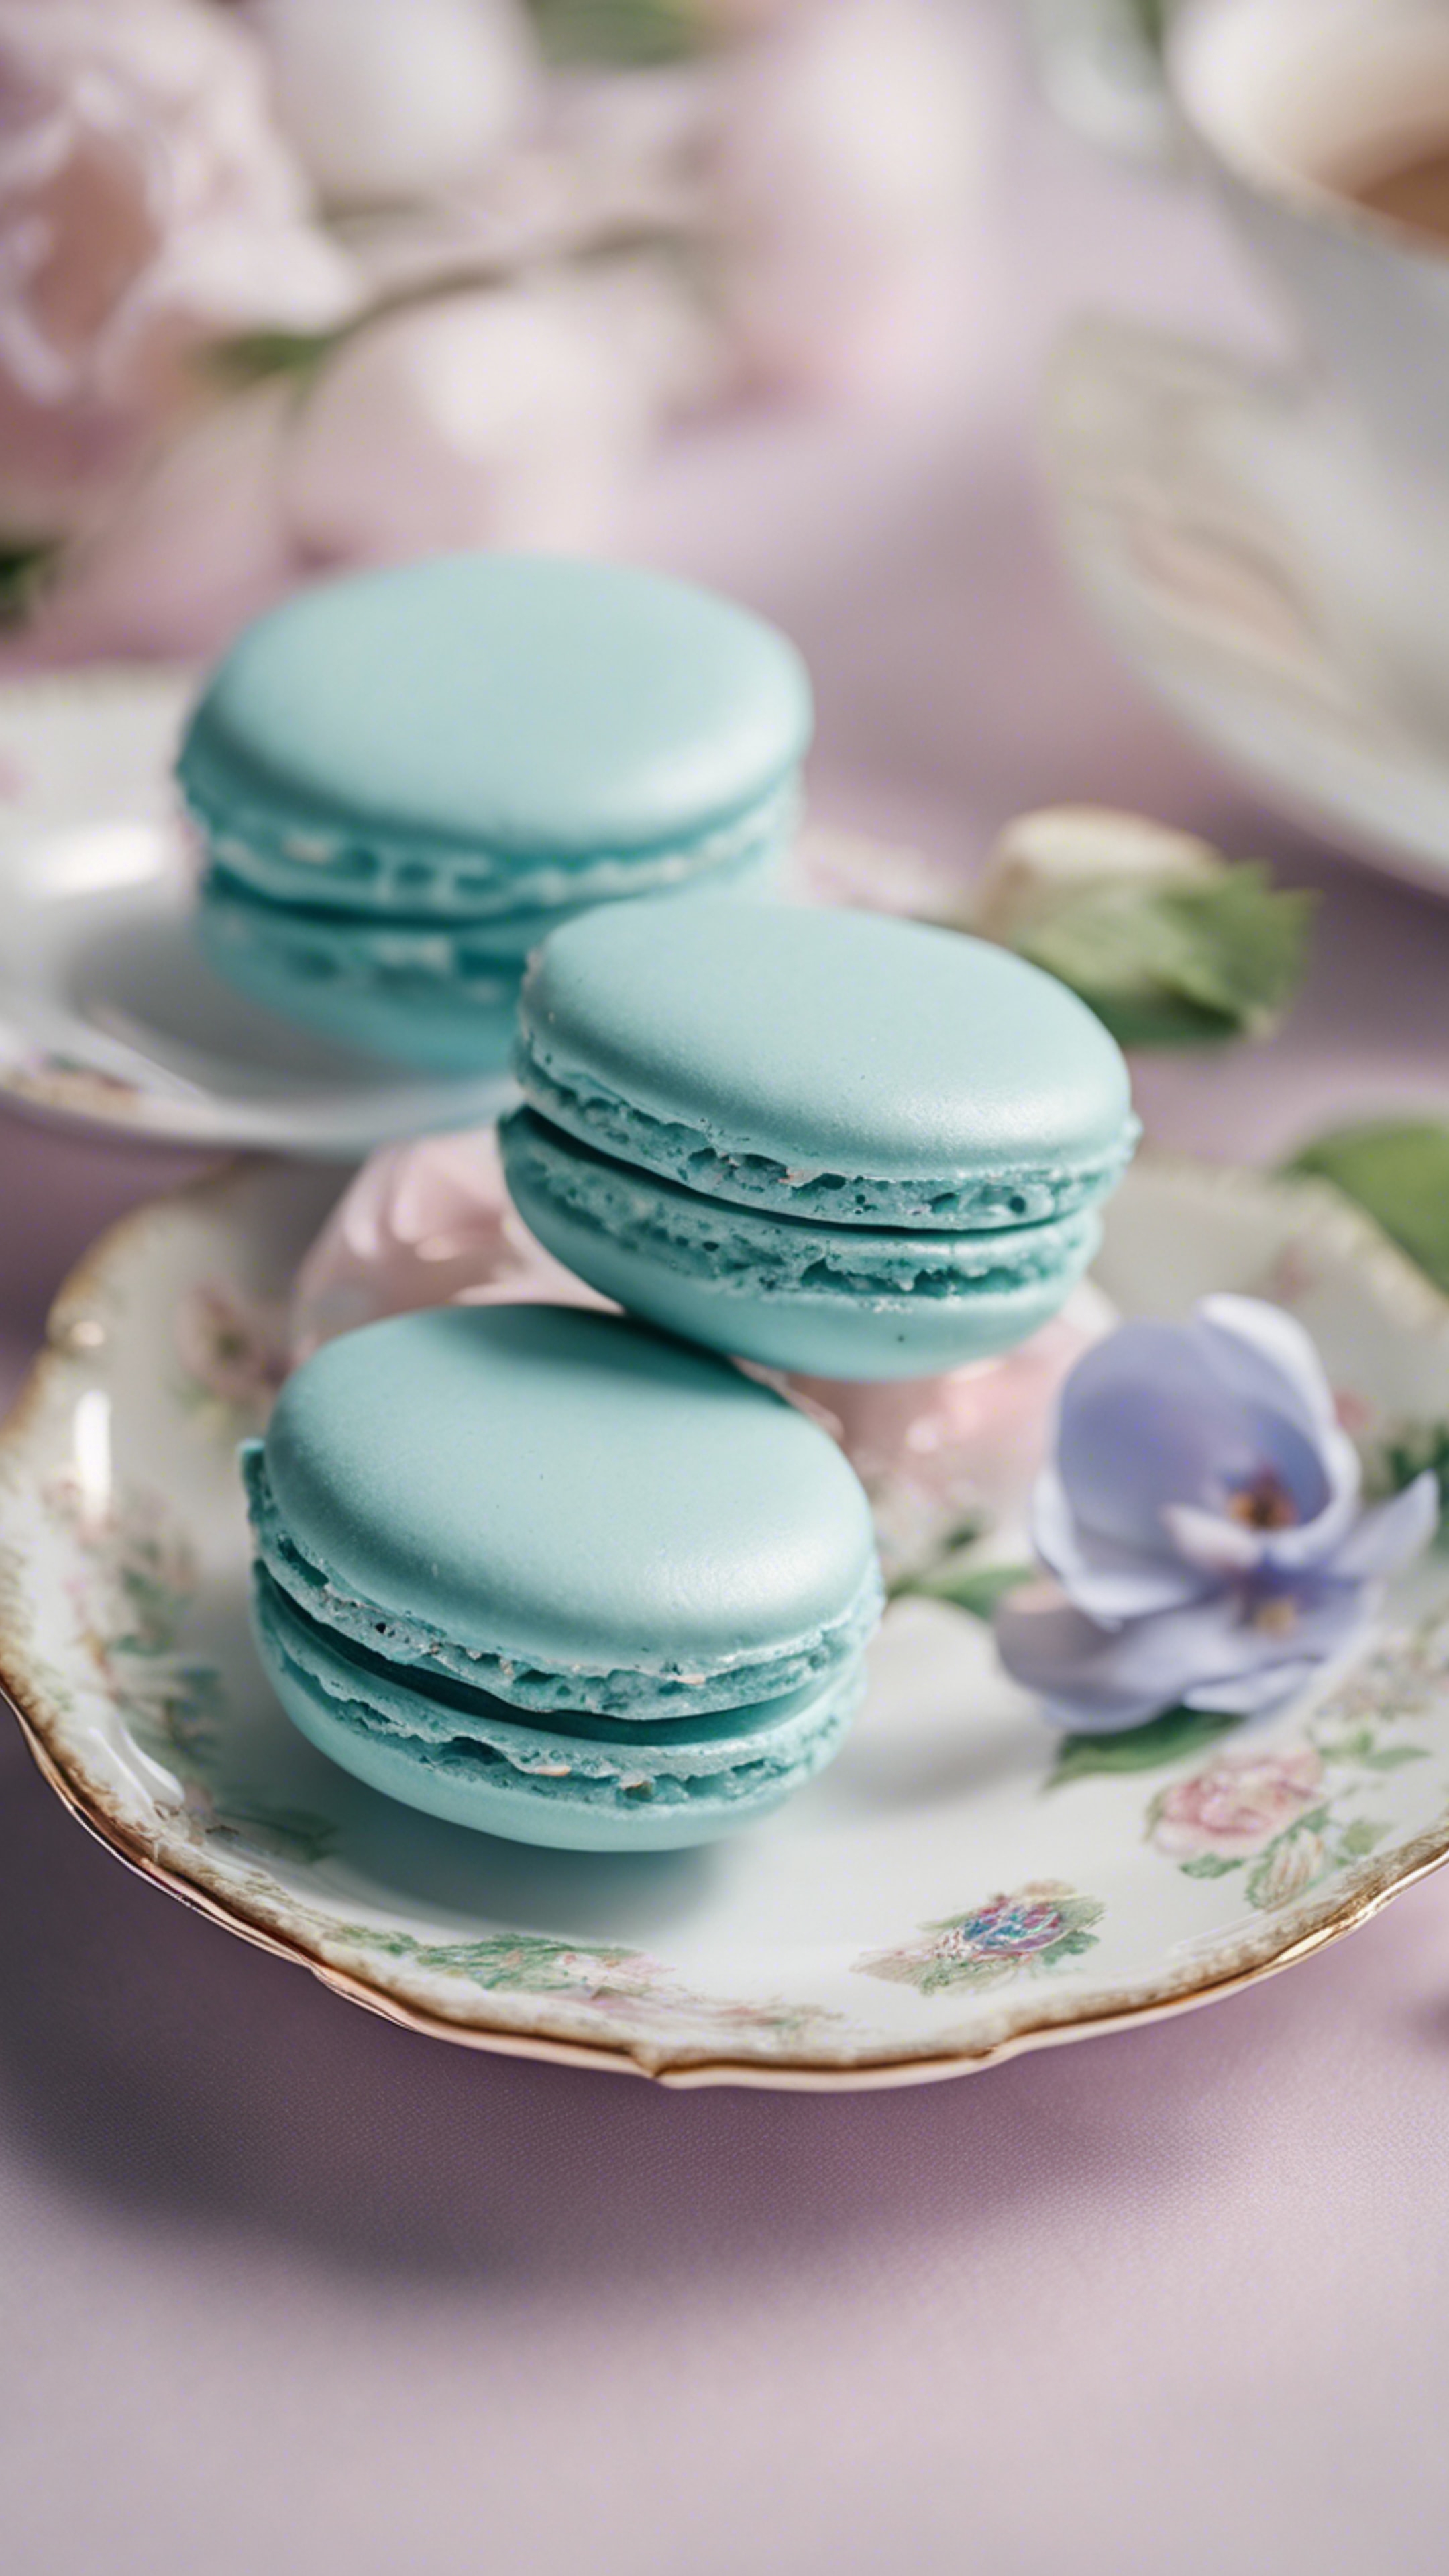 A pair of pastel blue French macarons on a dainty floral china plate. Papel de parede[cc240826fa4e4ee284e3]